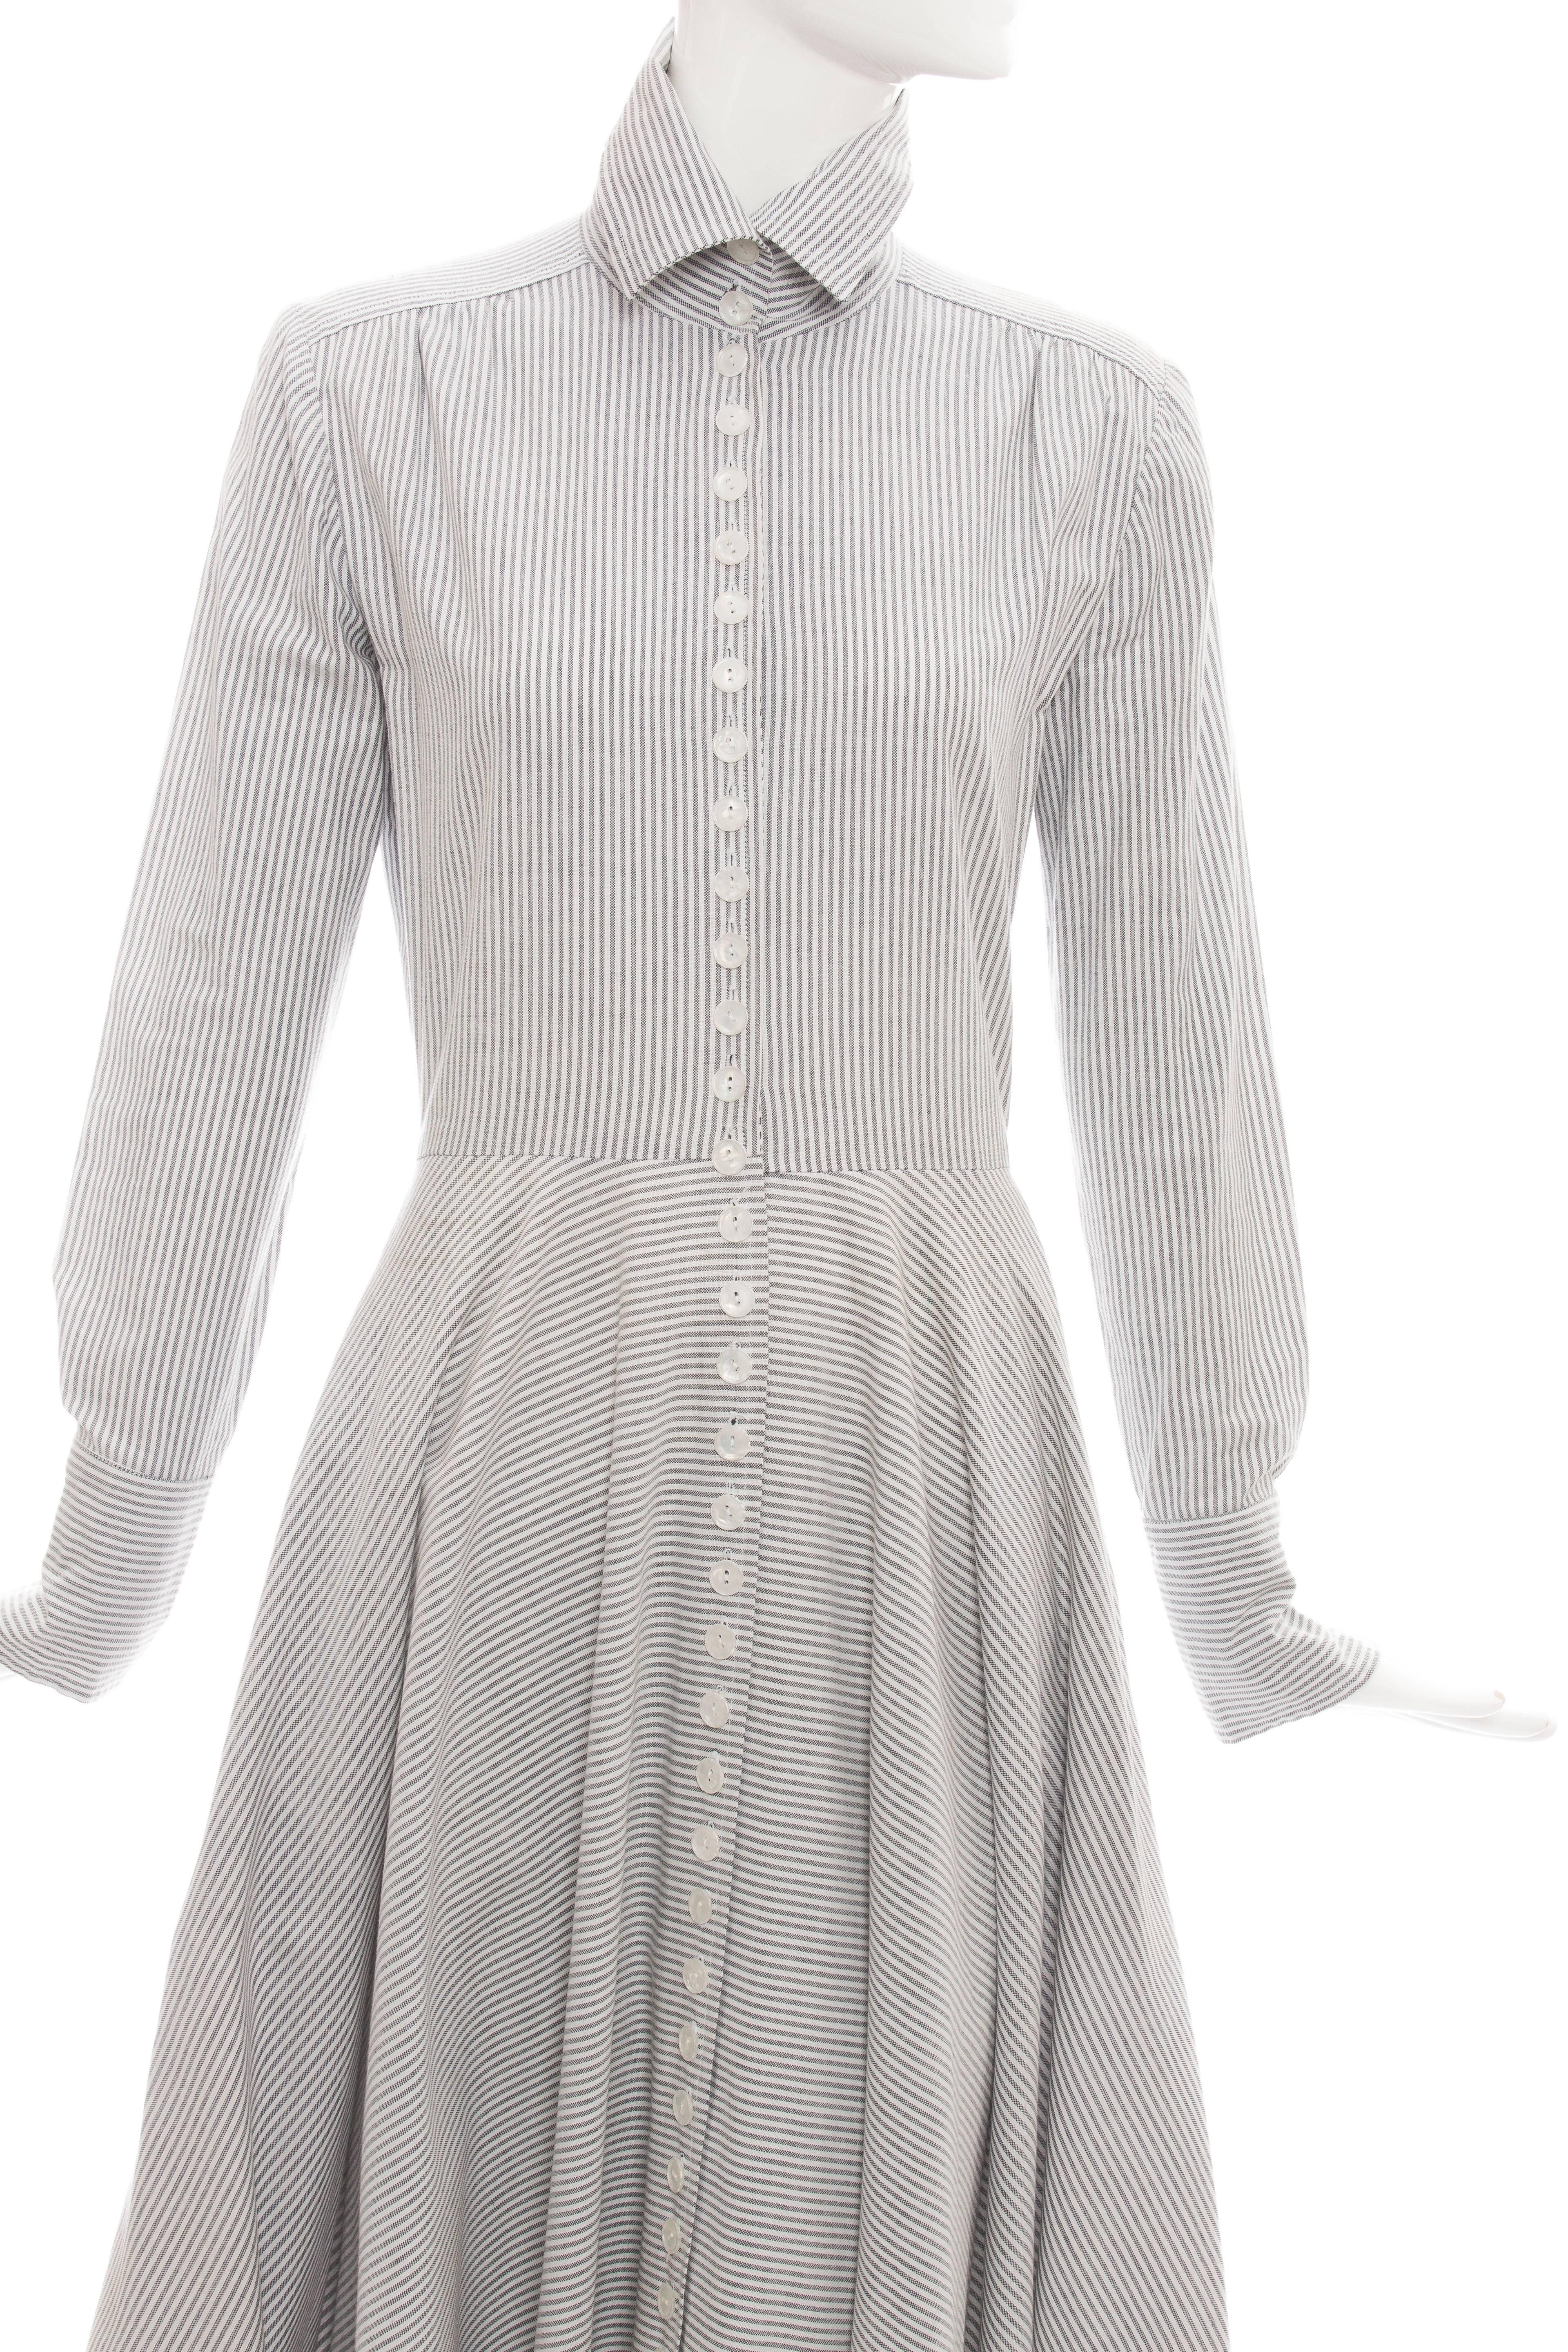 Norma Kamali Mother Of Pearl Button Front Cotton Dress, Circa 1980s 4